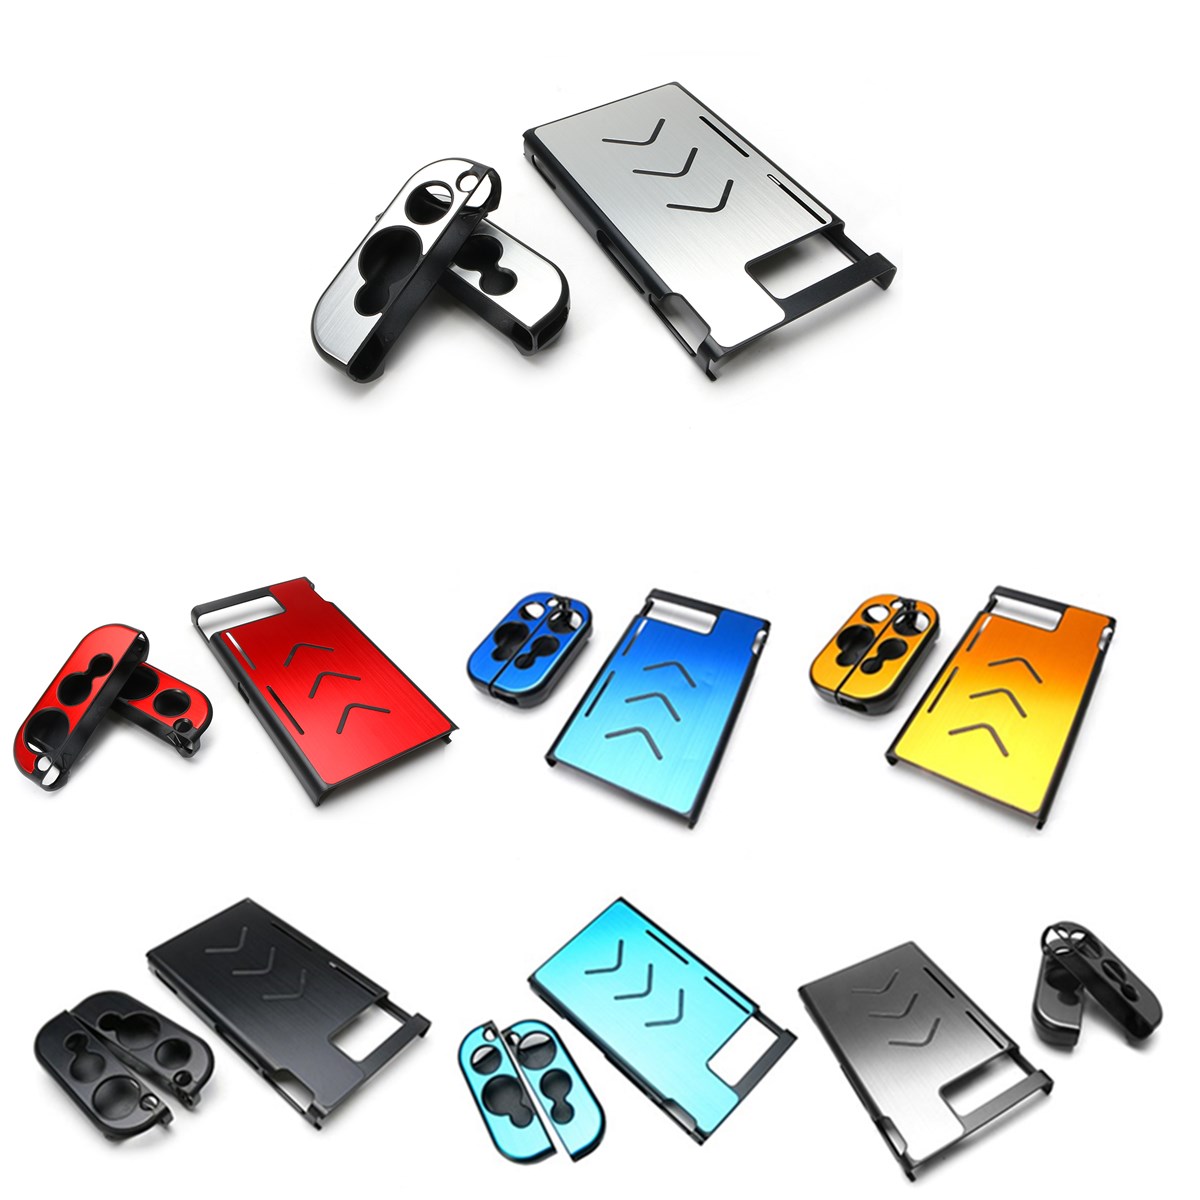 Replacement Accessories Housing Shell Case Protective For Nintendo Switch Controller Joy-con 72